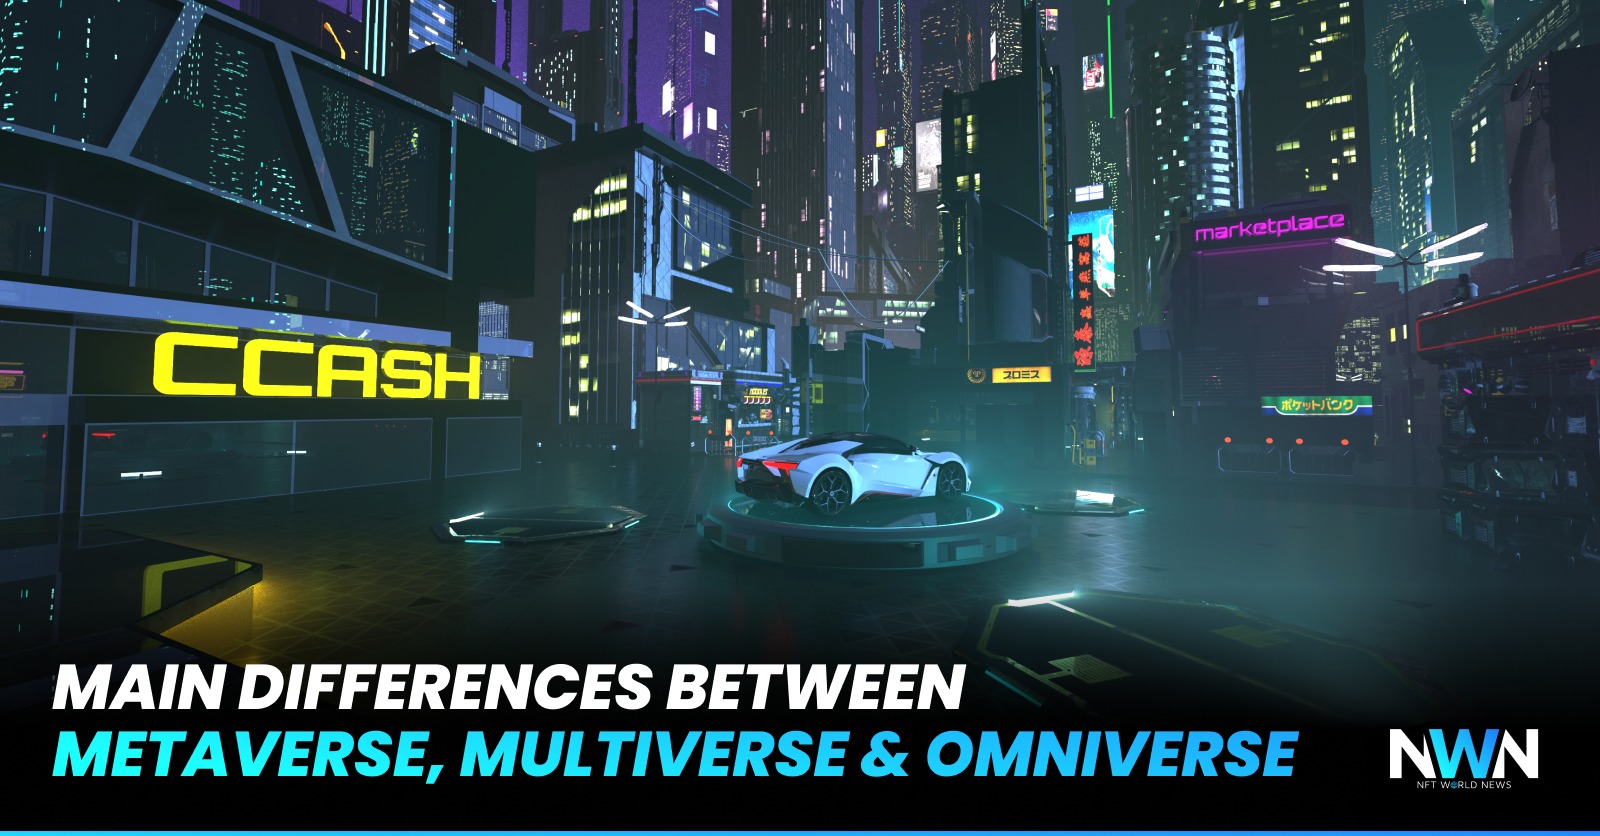 Main Differences Between Metaverse, Multiverse & Omniverse